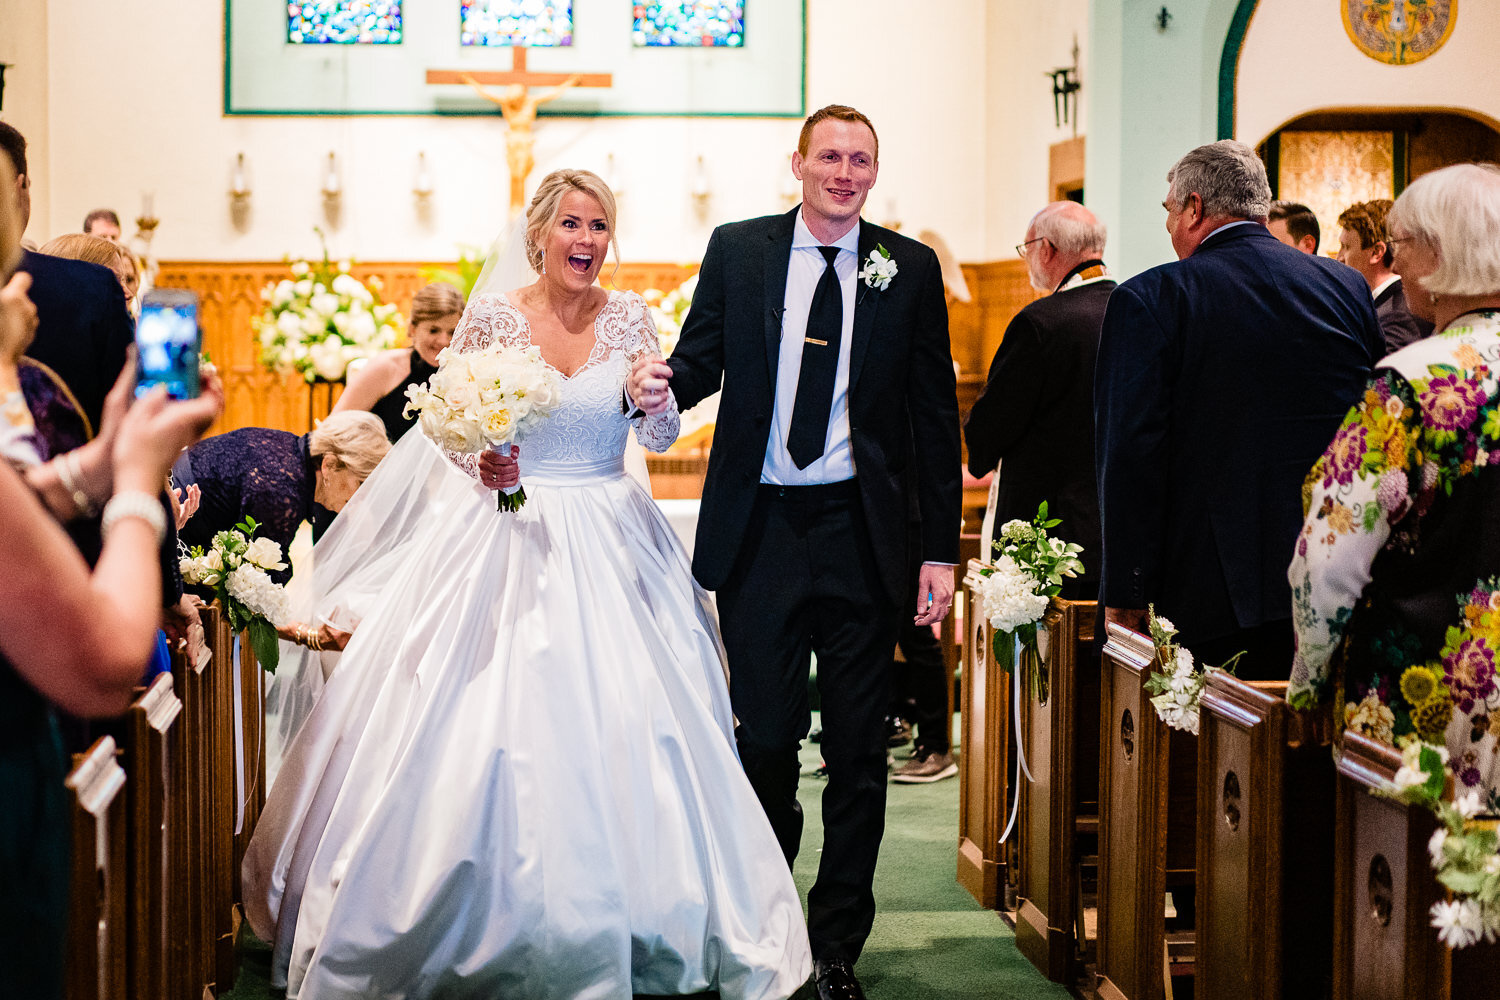 Wedding ceremony at St. Margaret's Church in Pearl River, NY